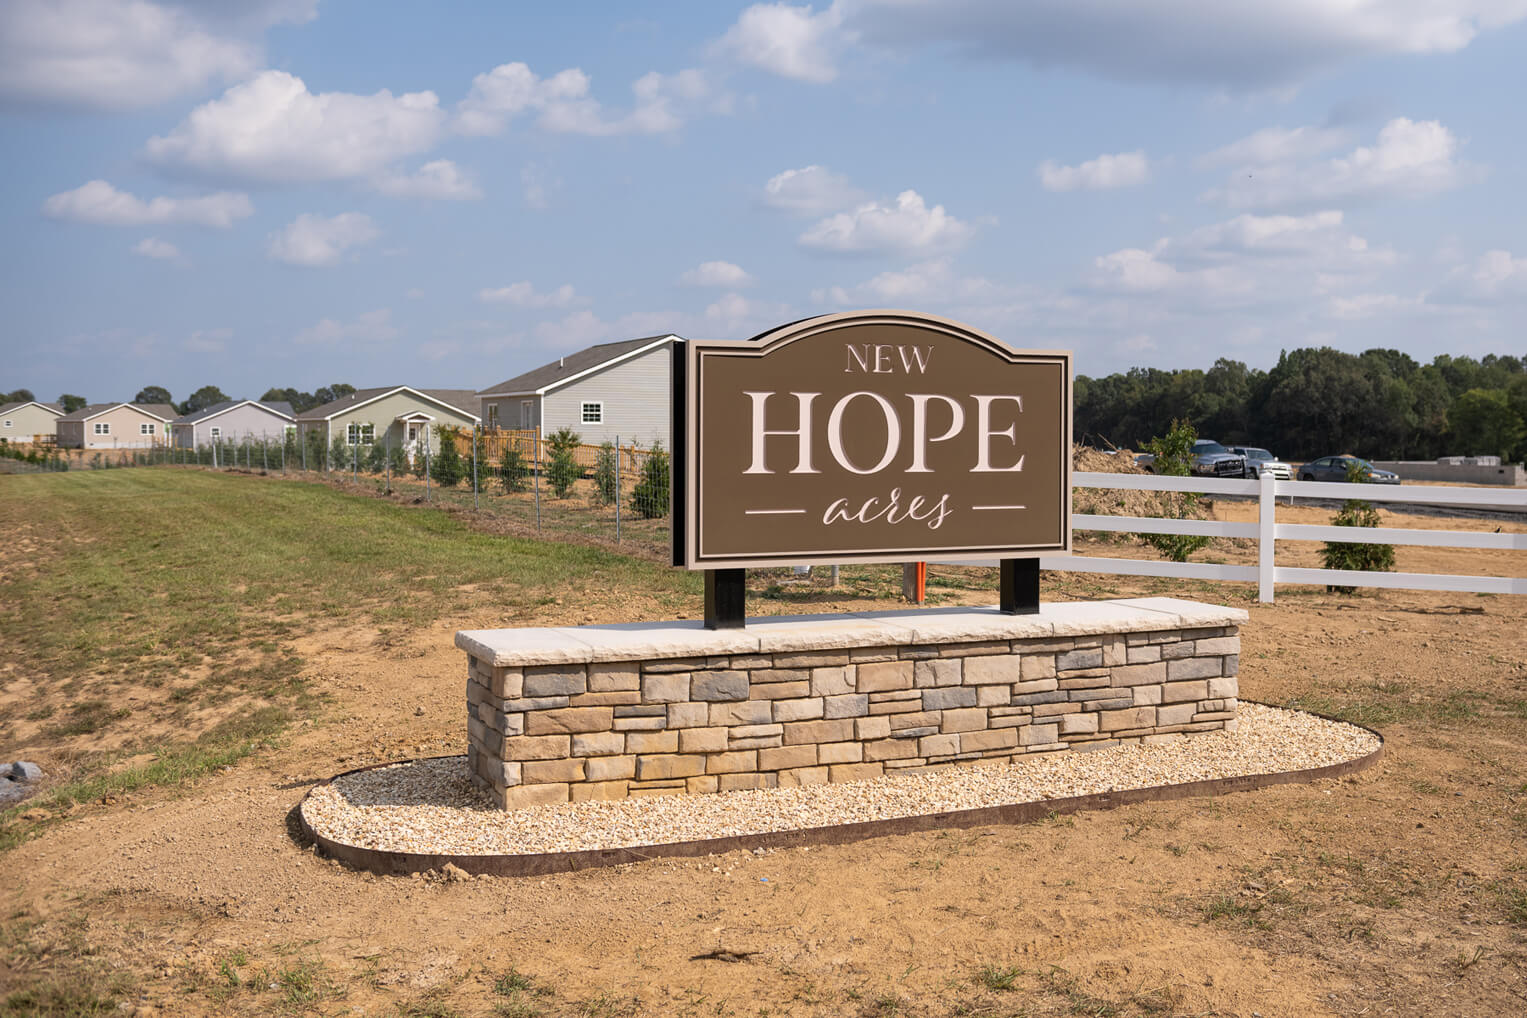 New Hope Acres has a foundation built on the Good News of Jesus Christ.